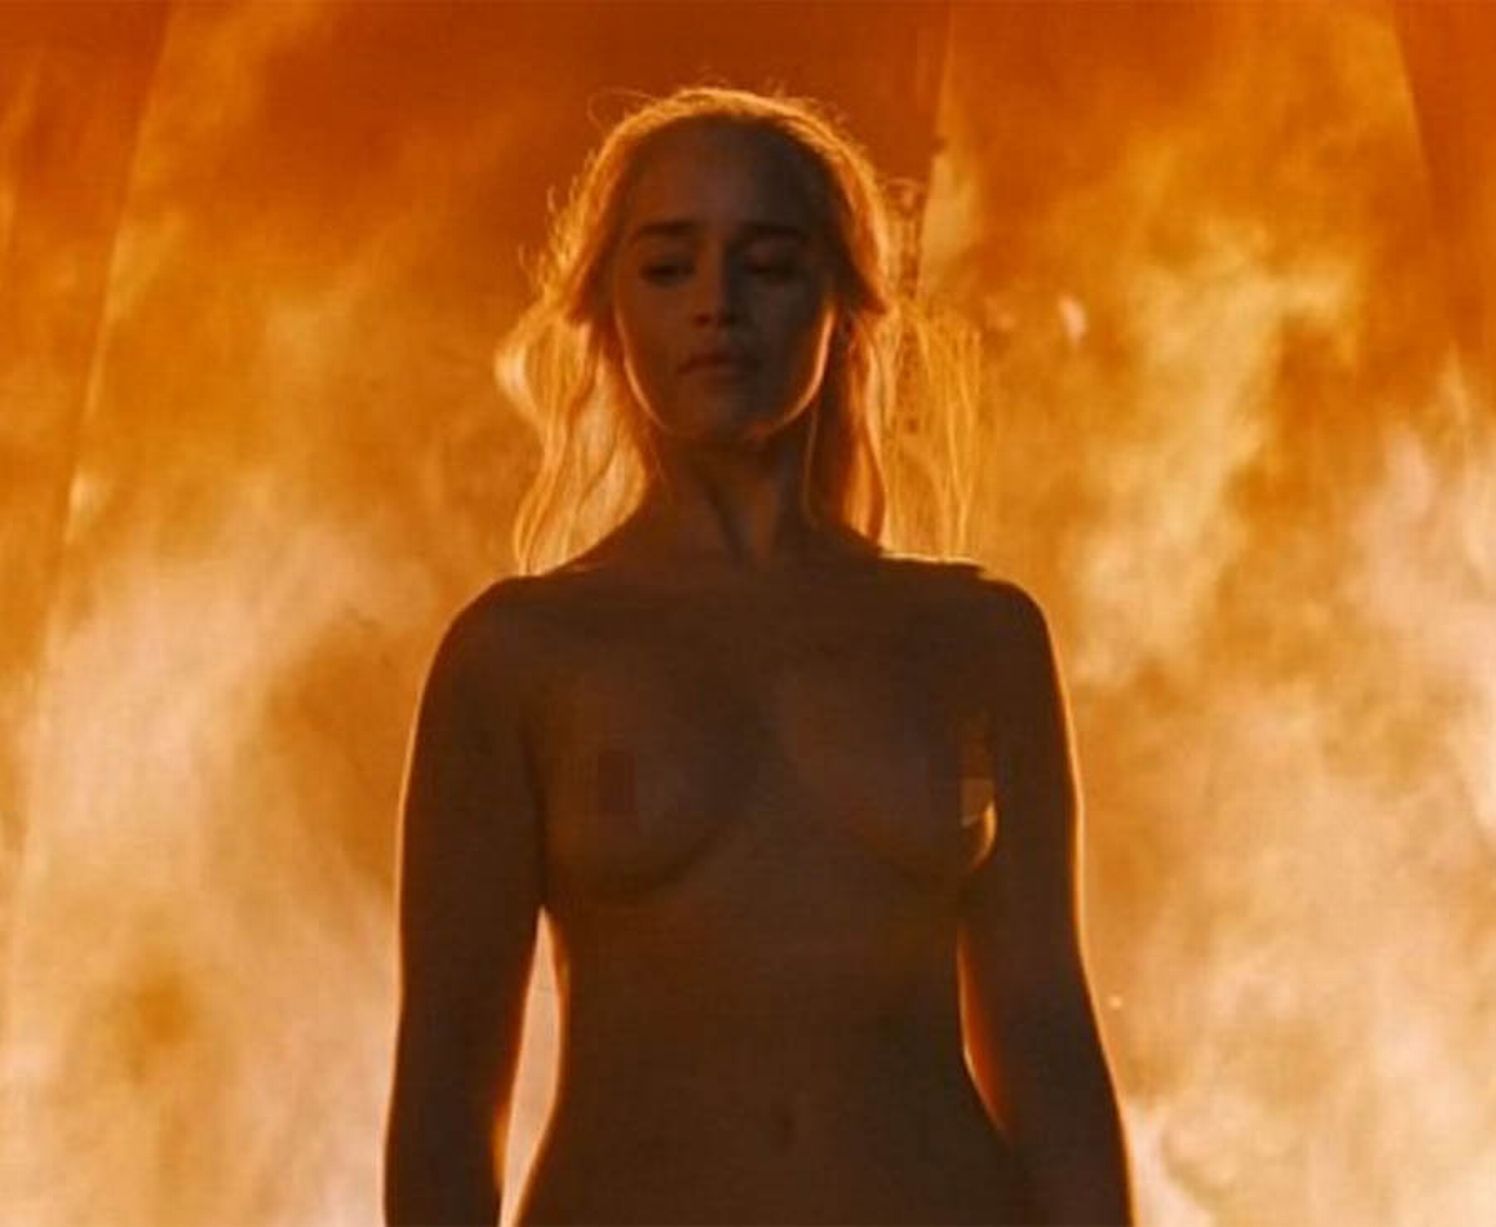 cynthia mcclure share game of thrones nude ladies photos